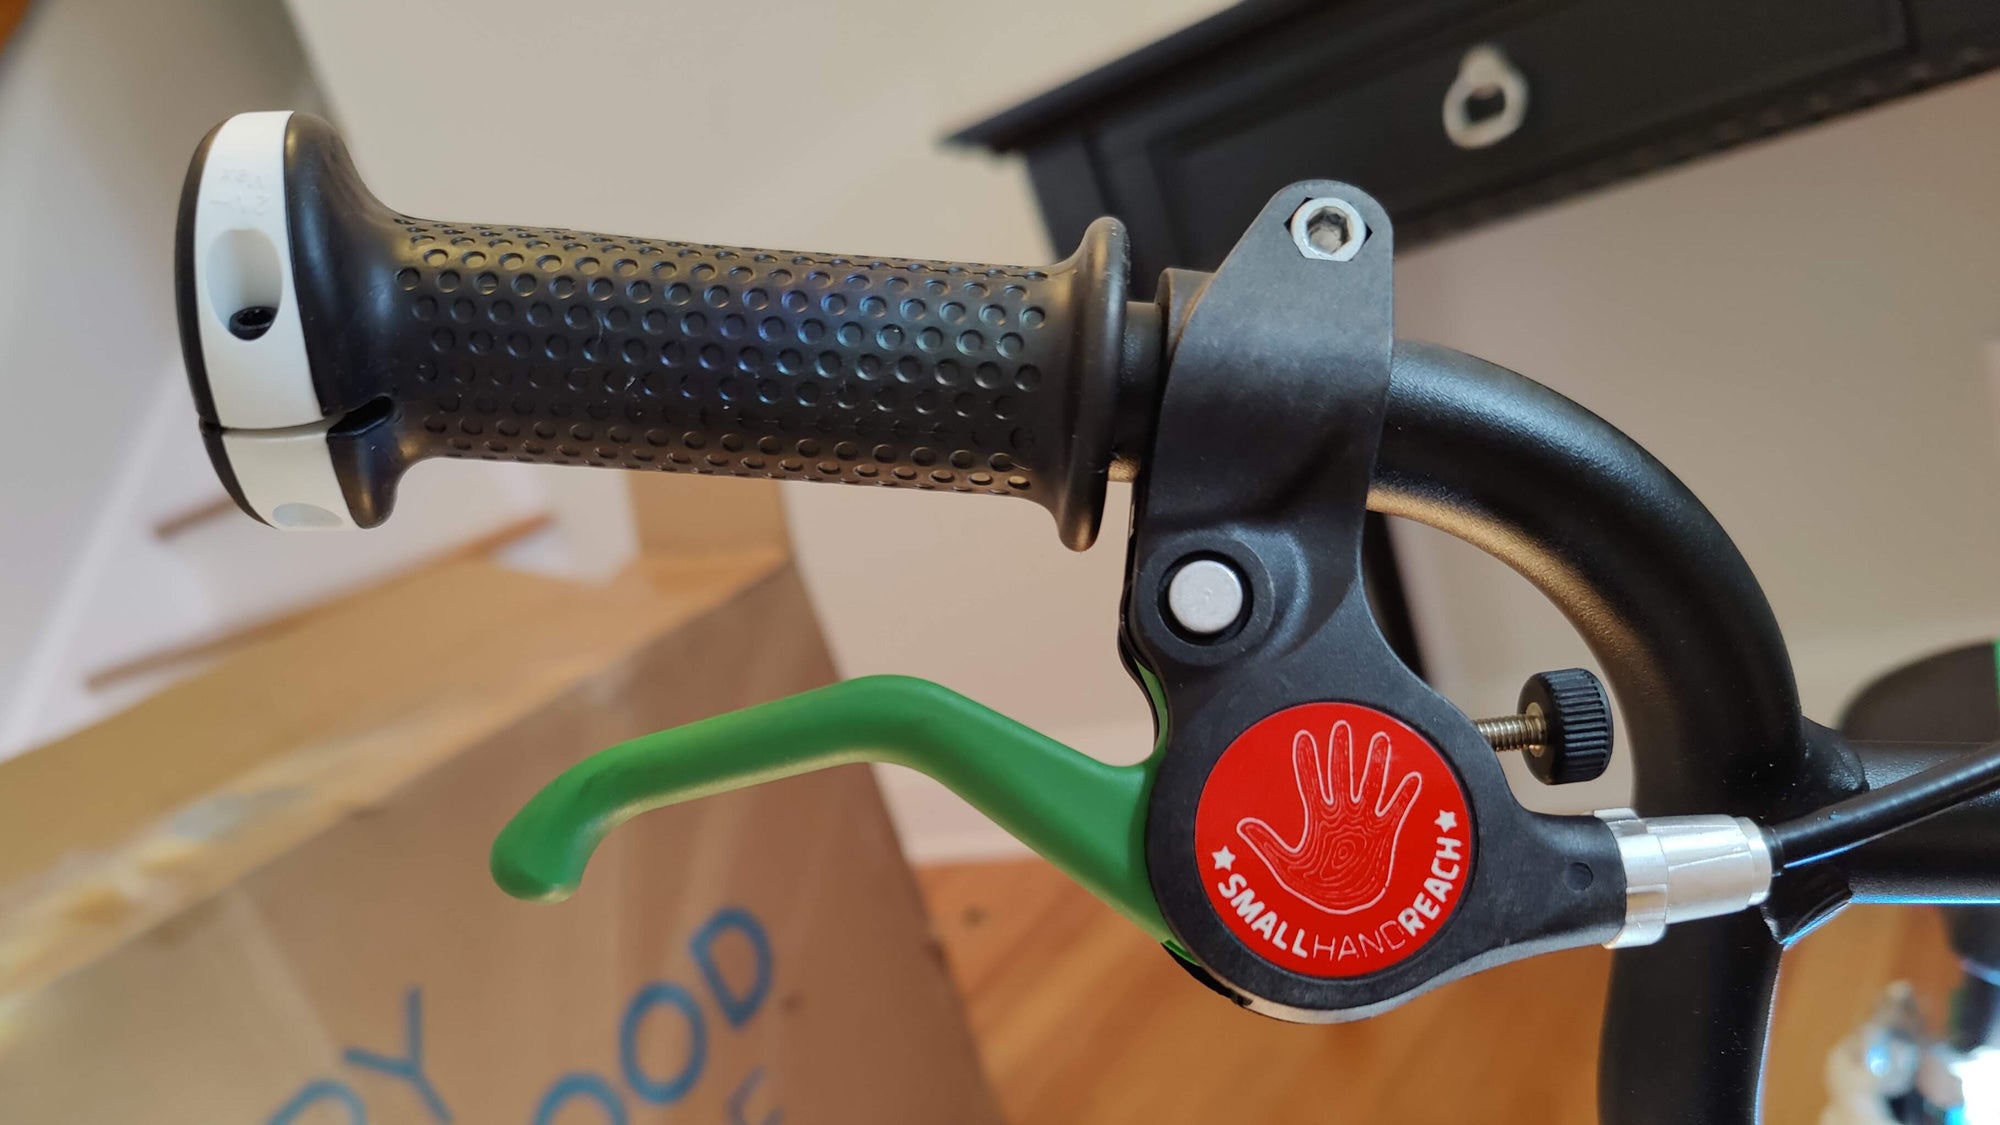 The Woom bike brake lever and grip close-up